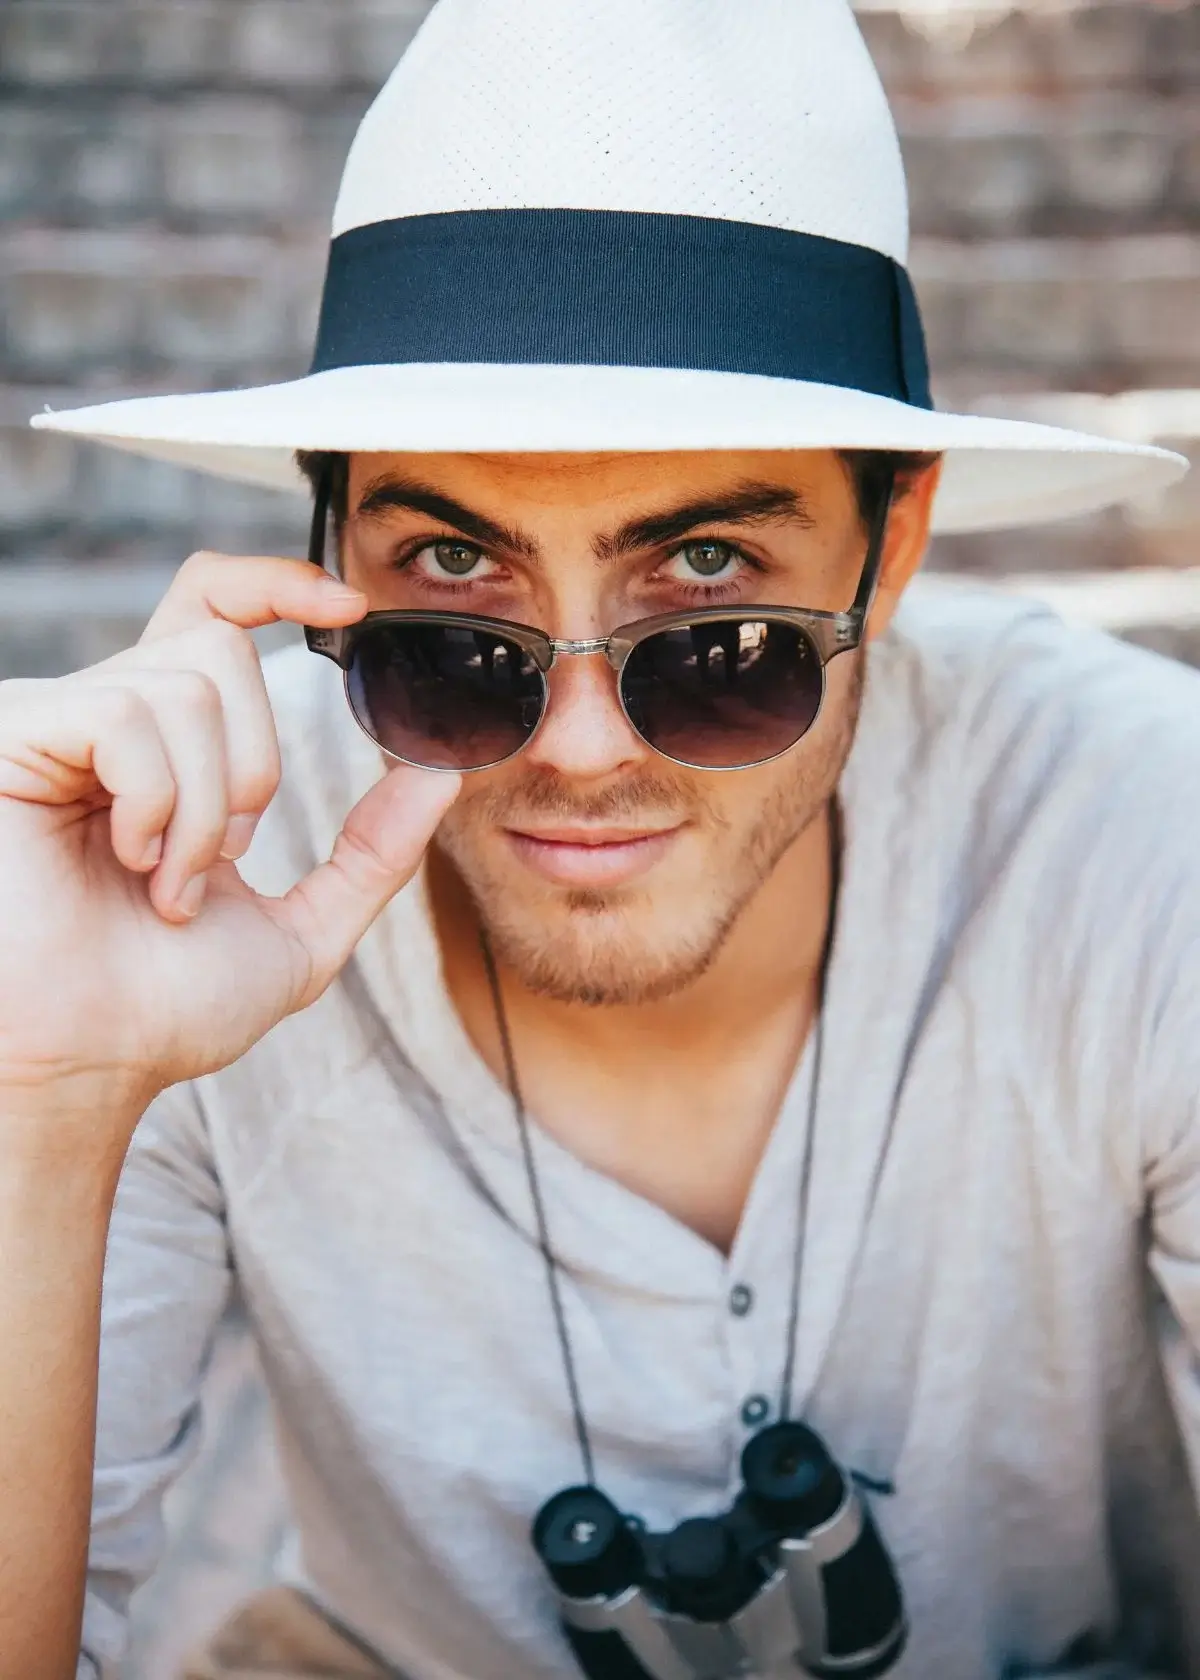 How to choose the best sunglasses for men?